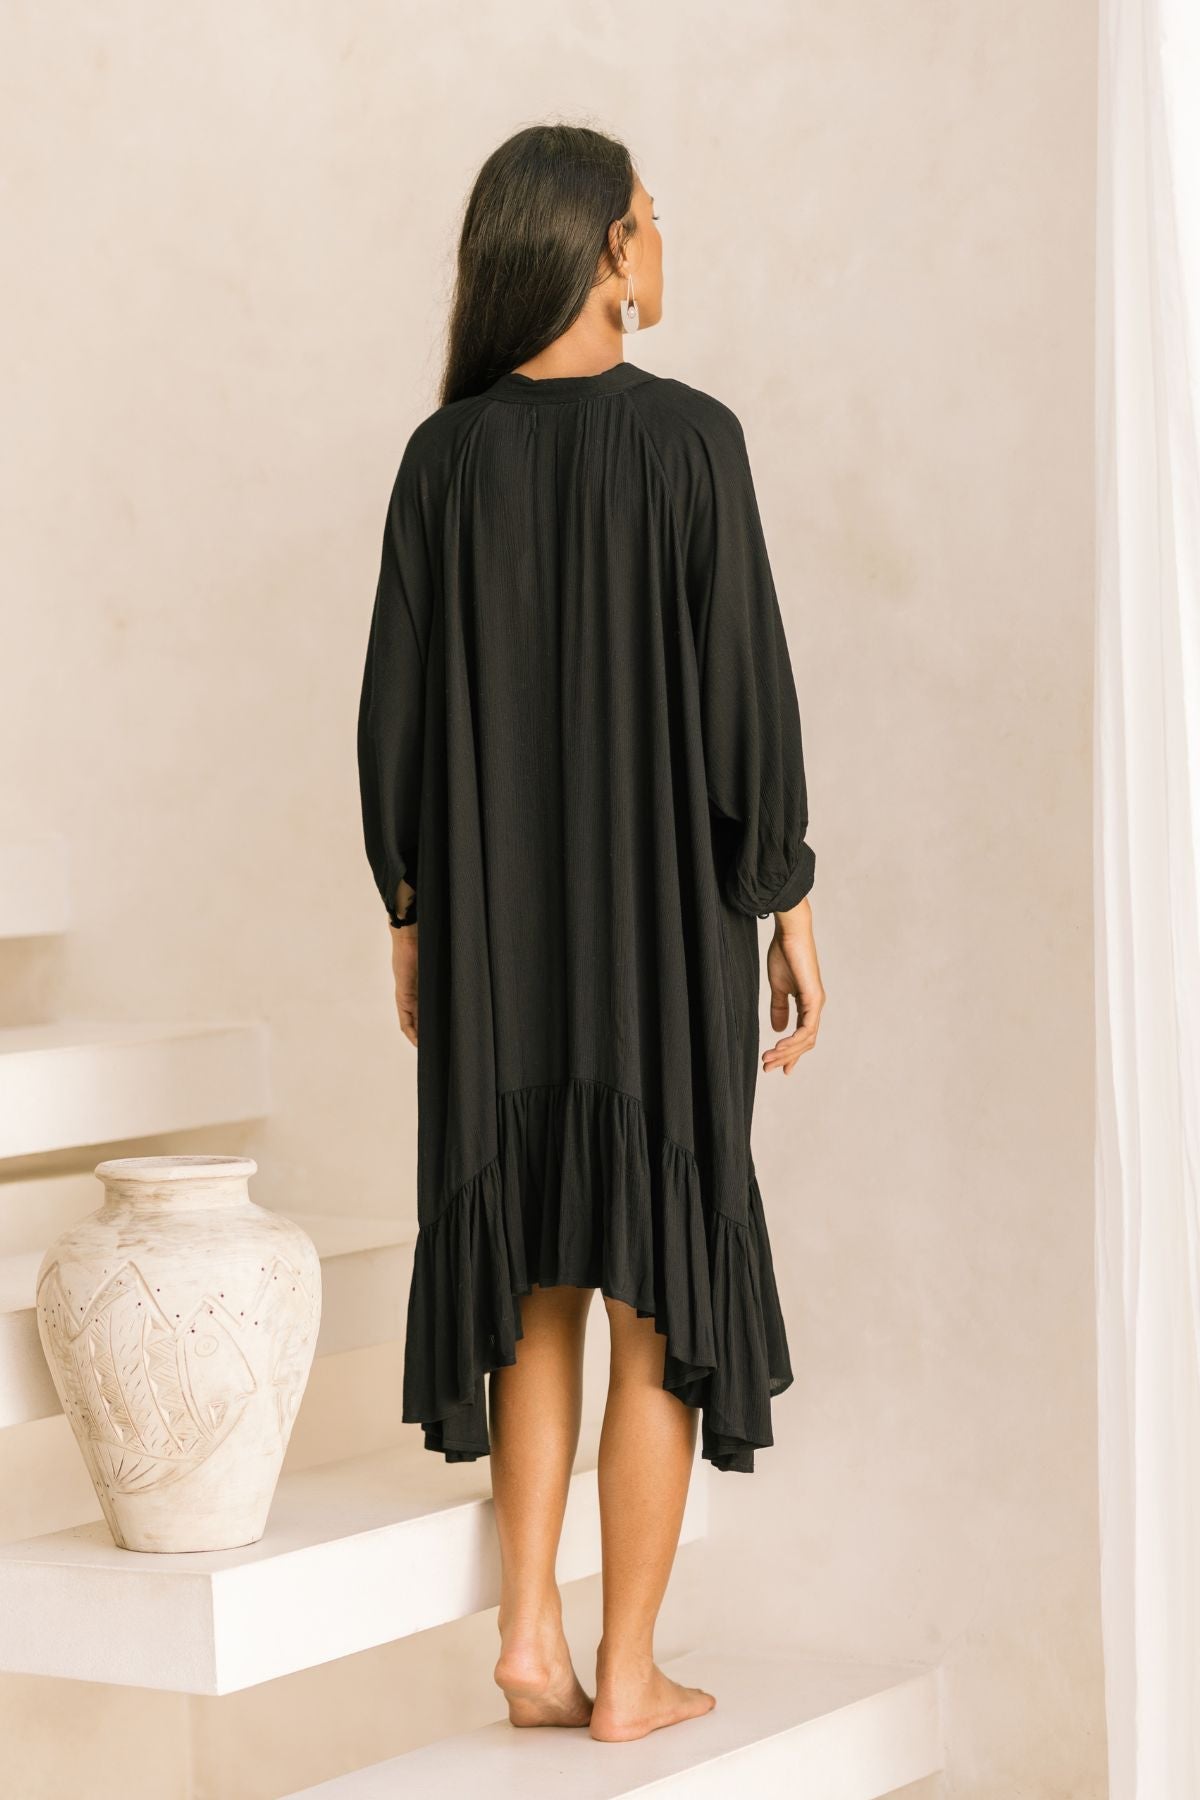 FRIDA Gown Short - Limited Edition (100% Bamboo Rayon, Black, Clay)